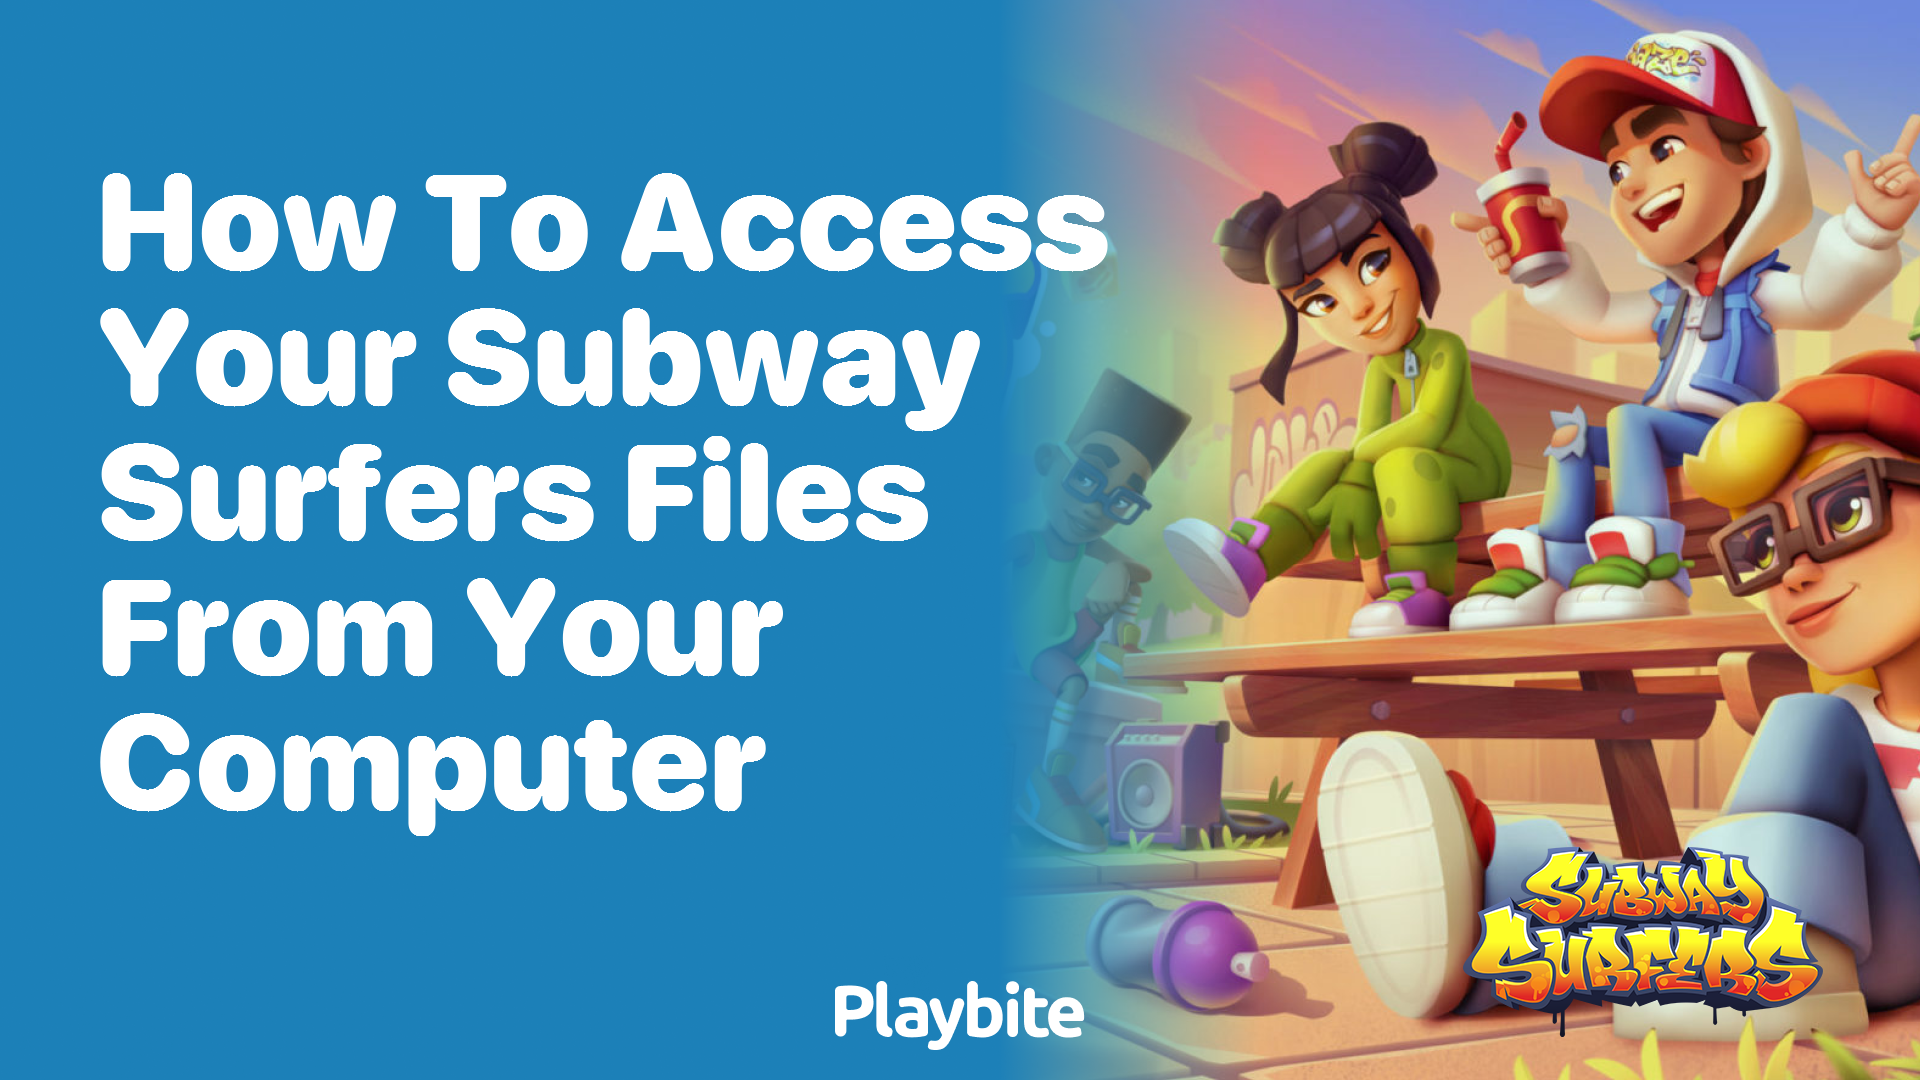 How to access your Subway Surfers files from your computer